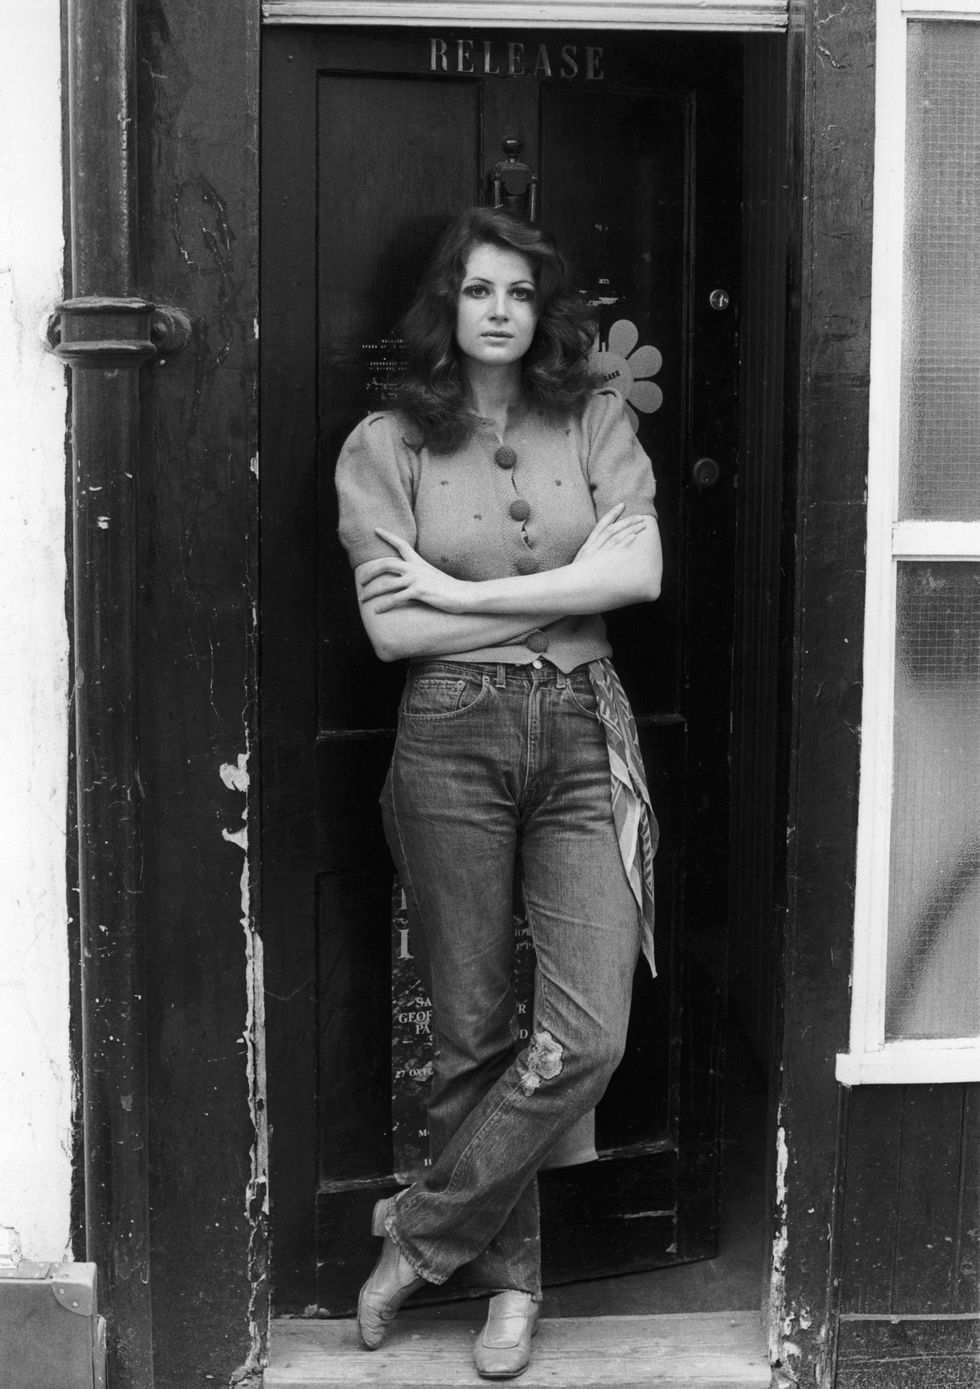 Photograph, Standing, Snapshot, Black-and-white, Monochrome, Photography, Jeans, Leg, Vintage clothing, Long hair, 